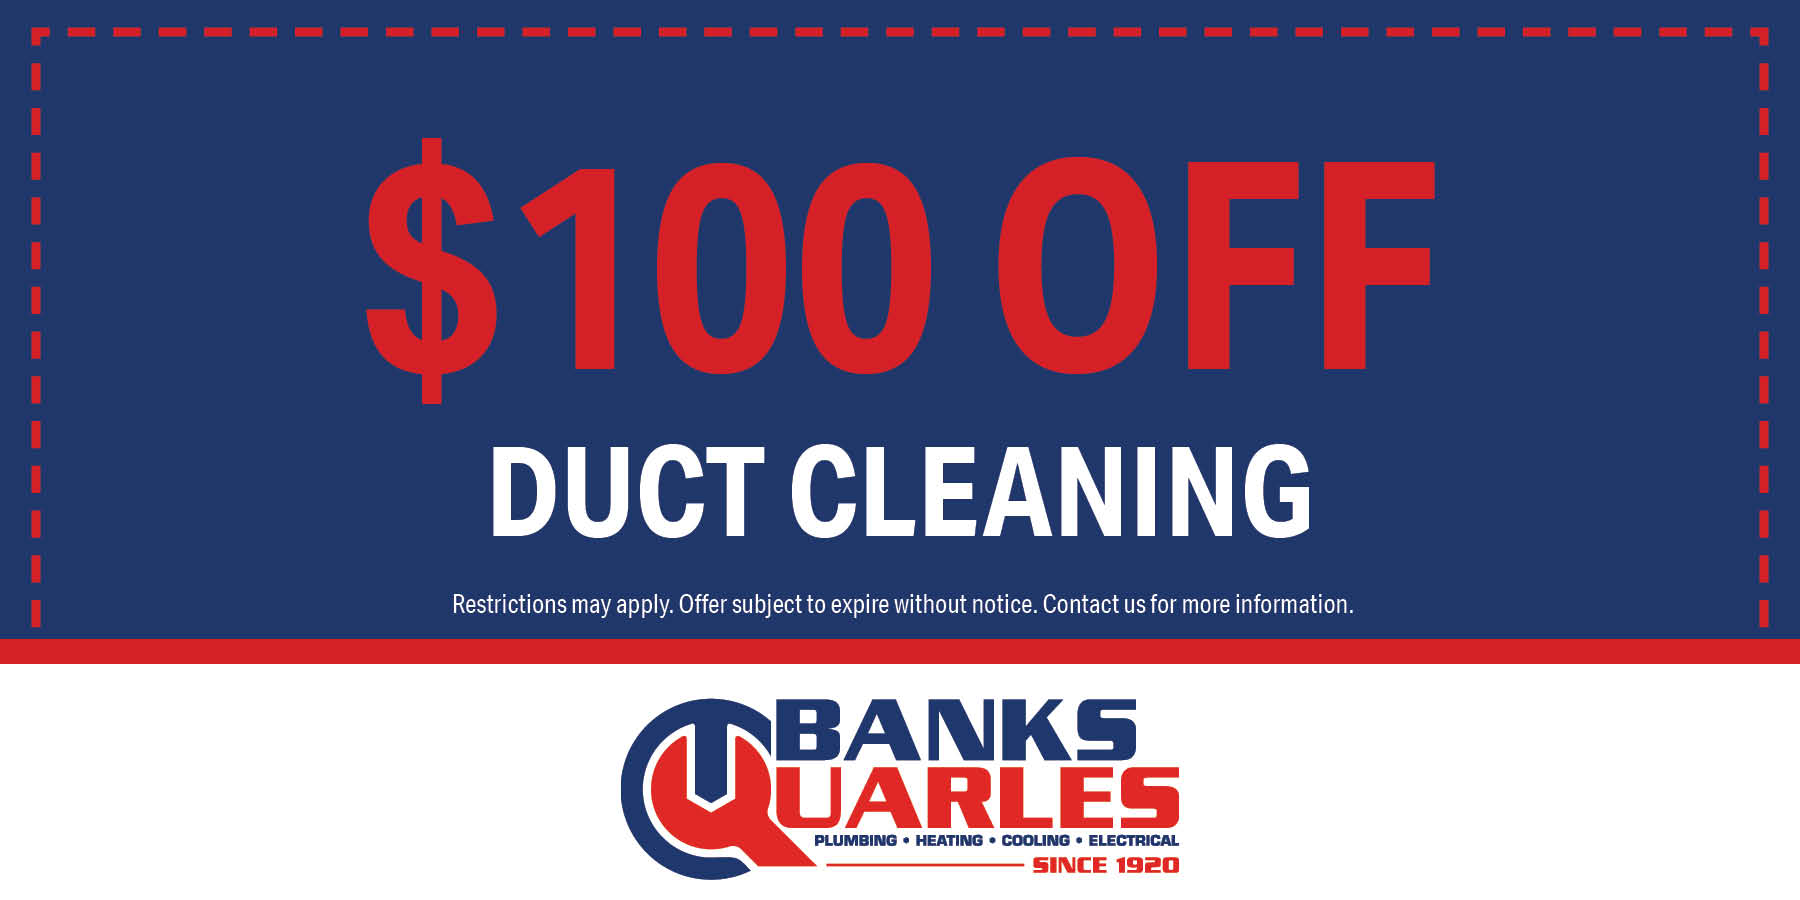 0 duct cleaning. Offer subject to expire without warning. Contact us for details.